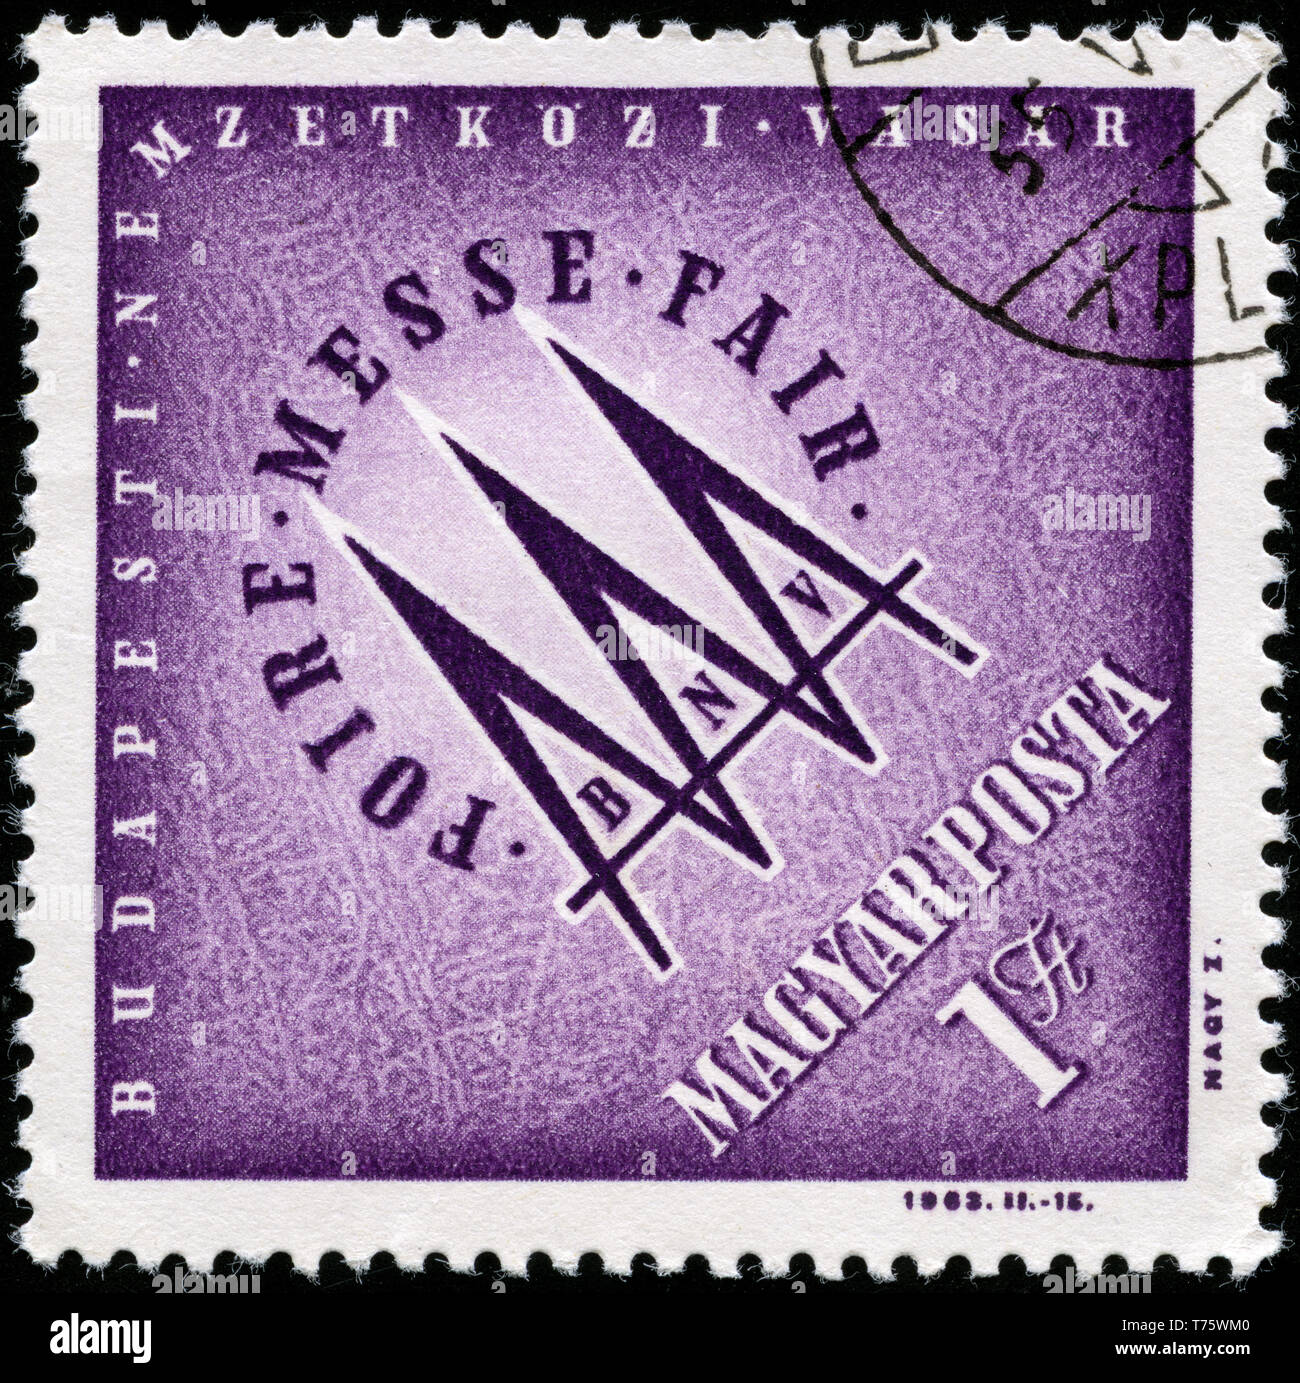 Postage stamp from Hungary in the Budapest International Fair series issued in 1963 Stock Photo